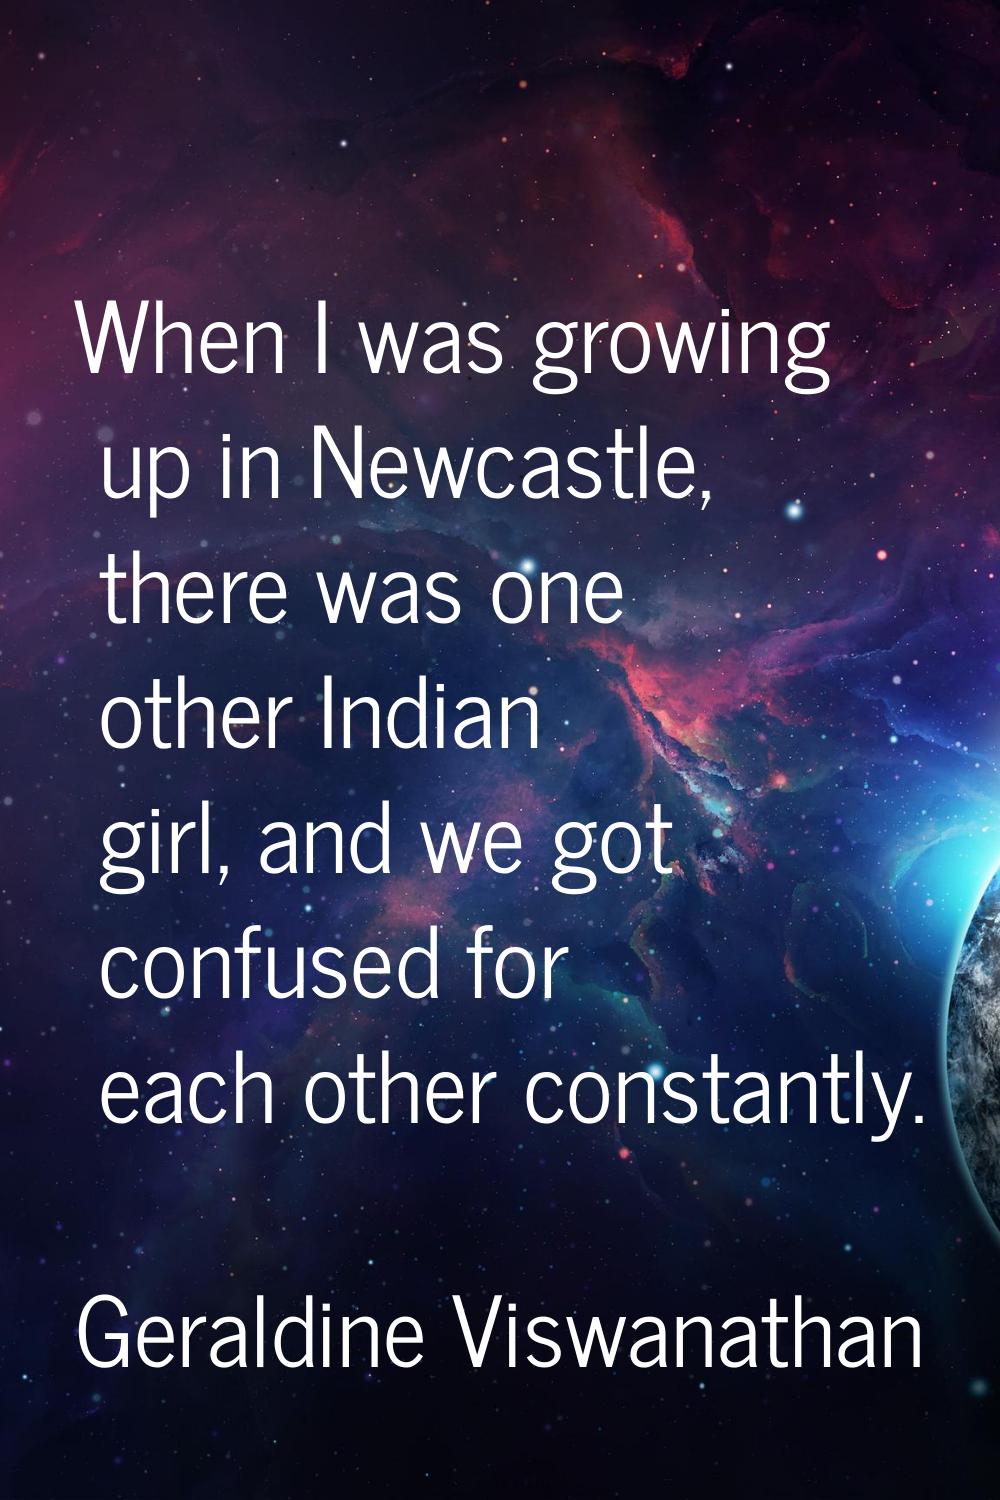 When I was growing up in Newcastle, there was one other Indian girl, and we got confused for each o